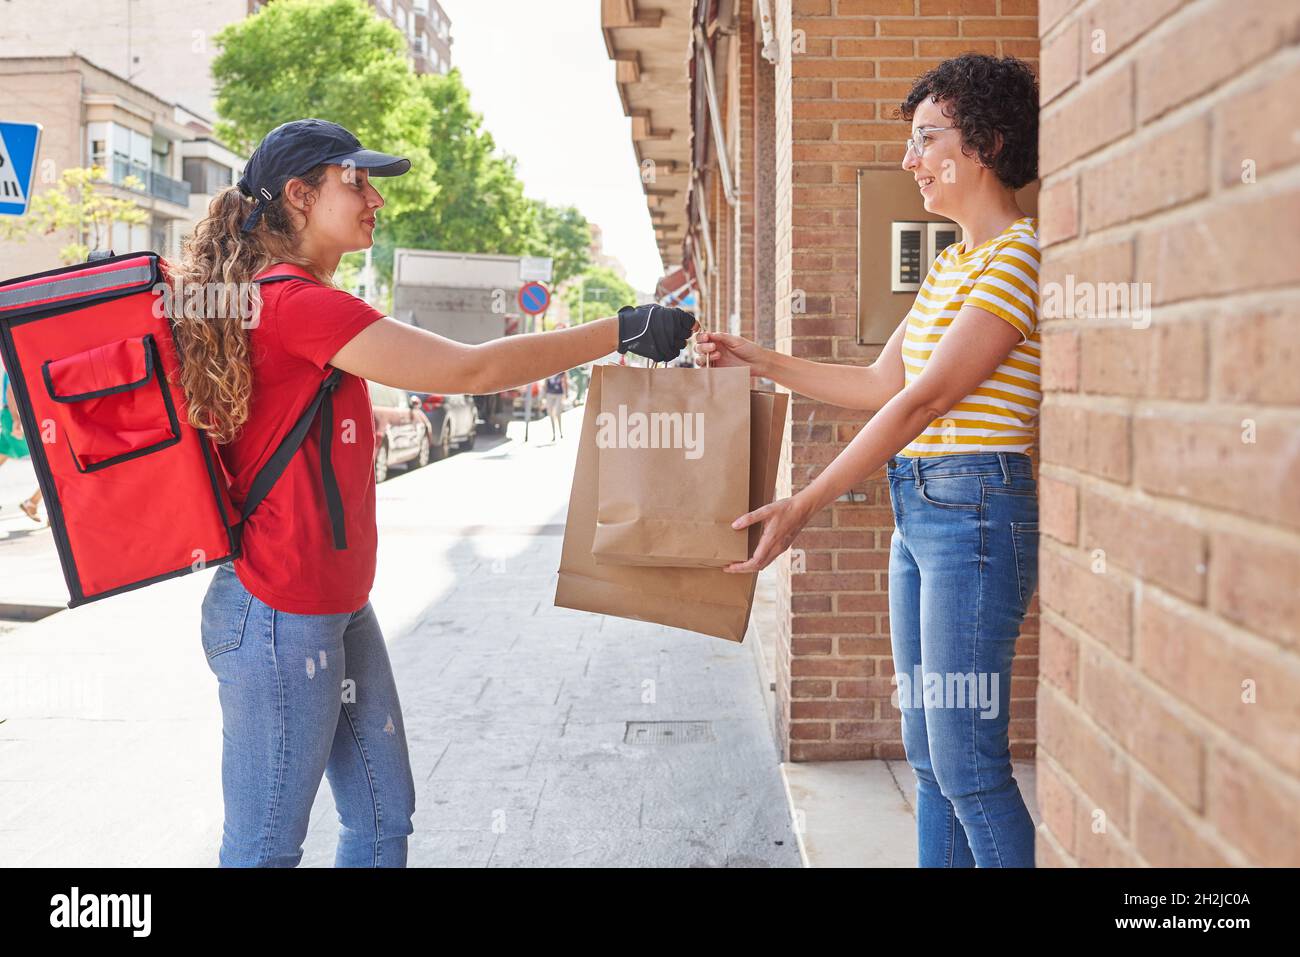 A delivery girl delivers bags of food on the street Stock Photo